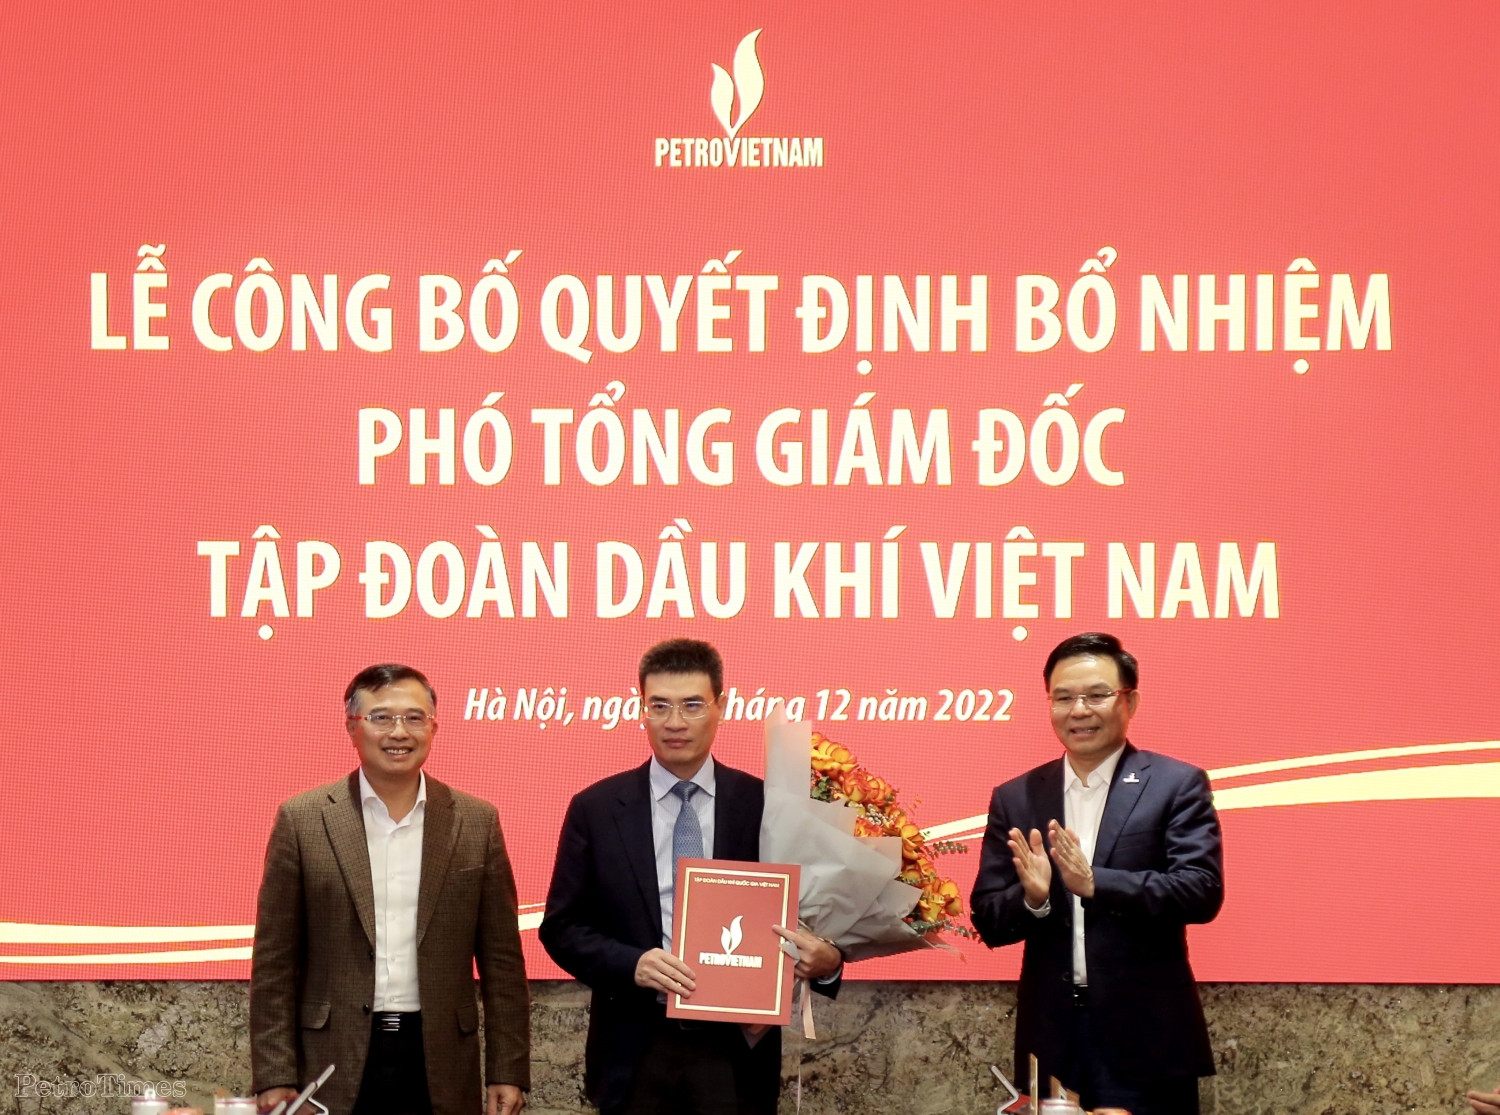 Petrovietnam announces and awards decision on the Group’s Vice President